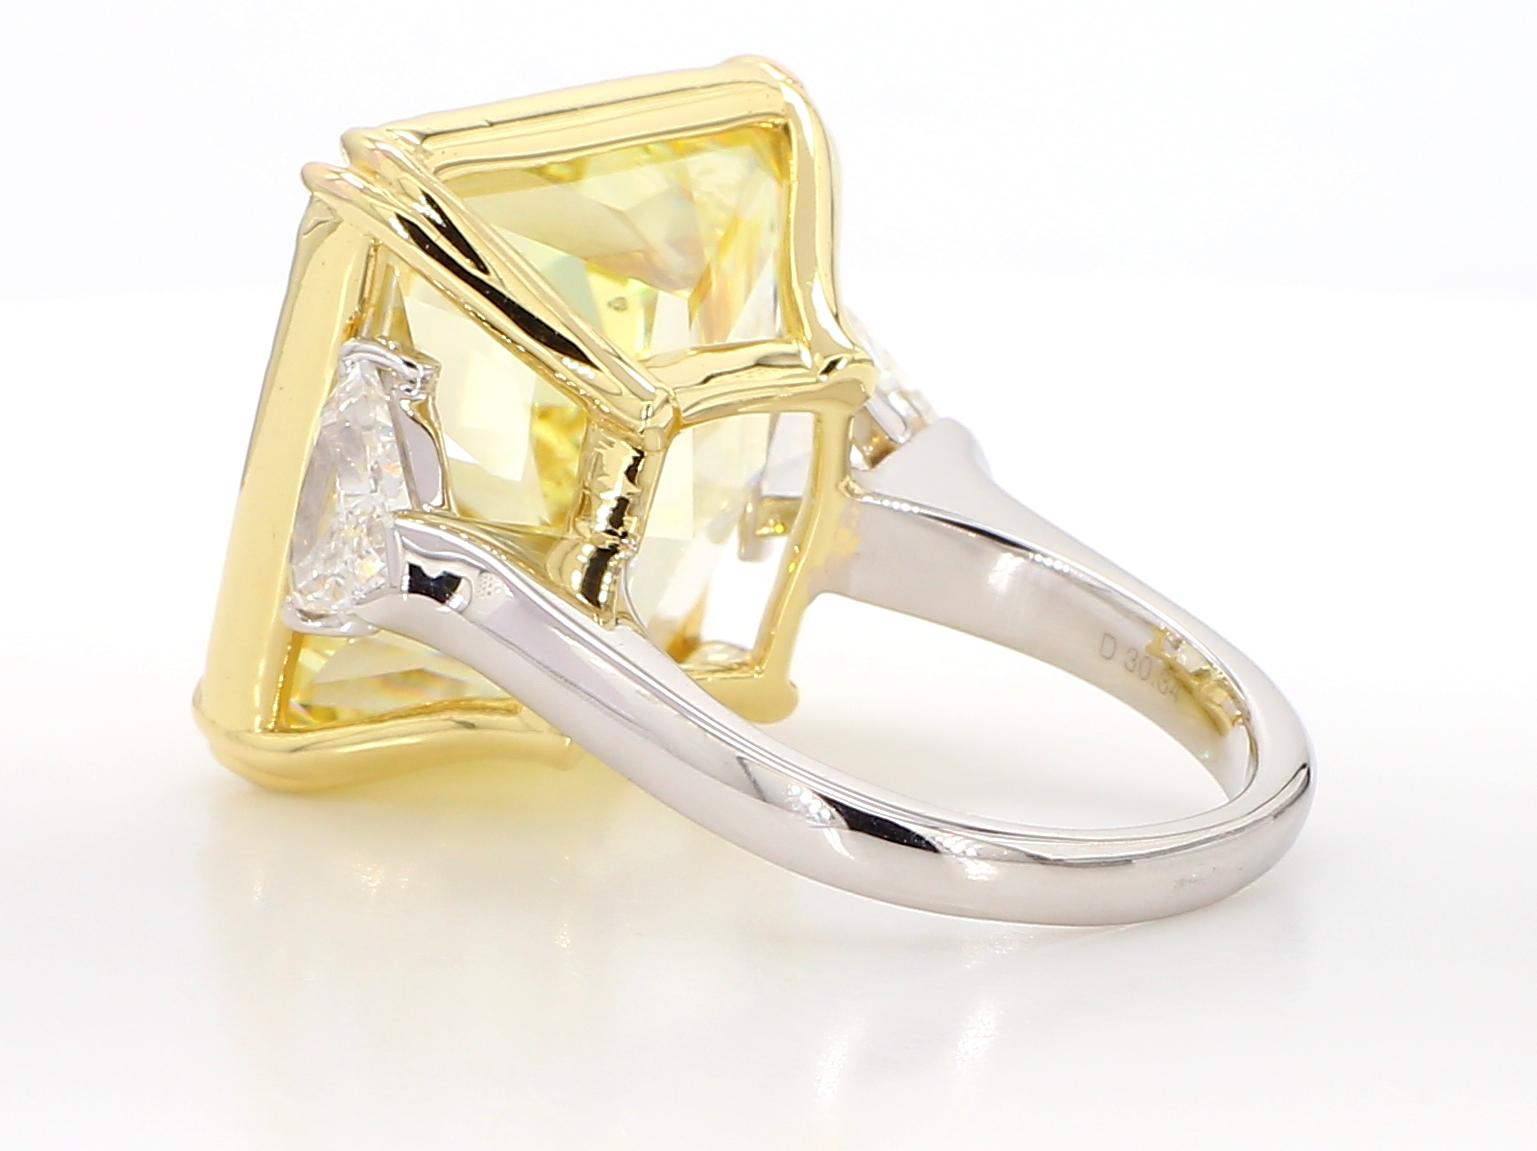 Radiant Cut 30 Carat Fancy Intense Yellow Diamond Engagement Ring, In Platinum GIA Certified For Sale